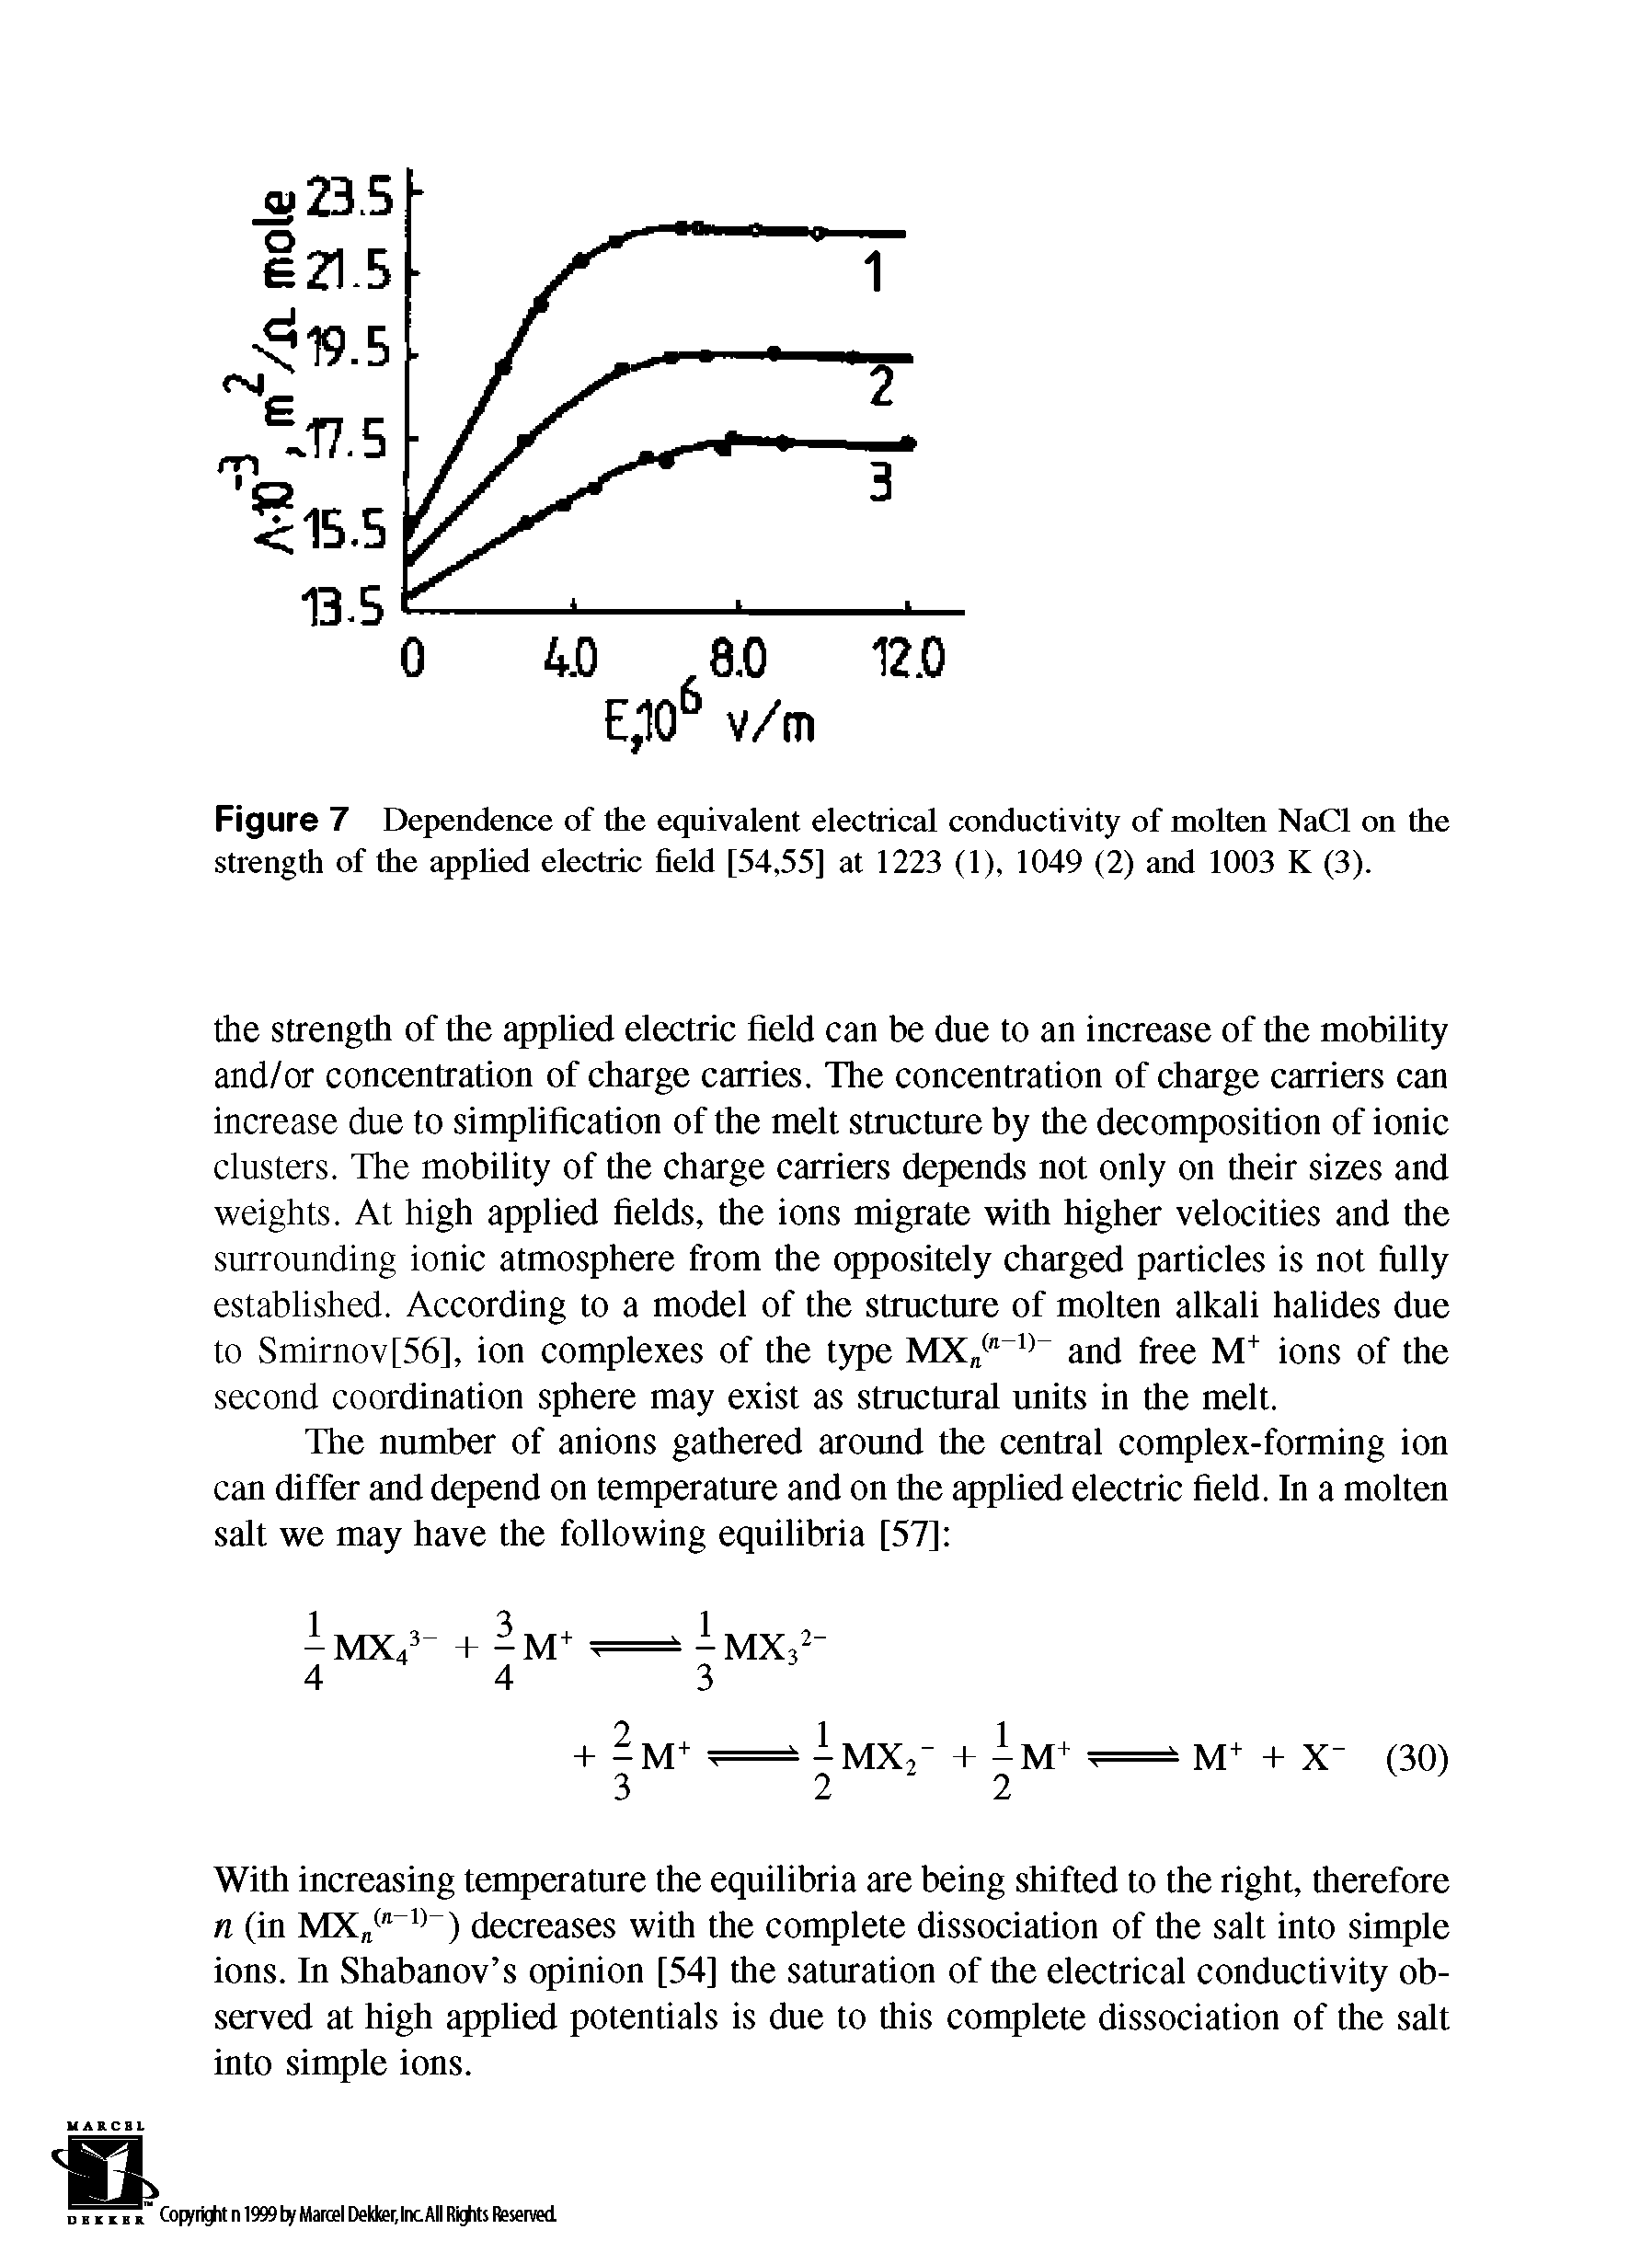 Figure 7 Dependence of the equivalent electrical conductivity of molten NaCl on the strength of the applied electric field [54,55] at 1223 (1), 1049 (2) and 1003 K (3).